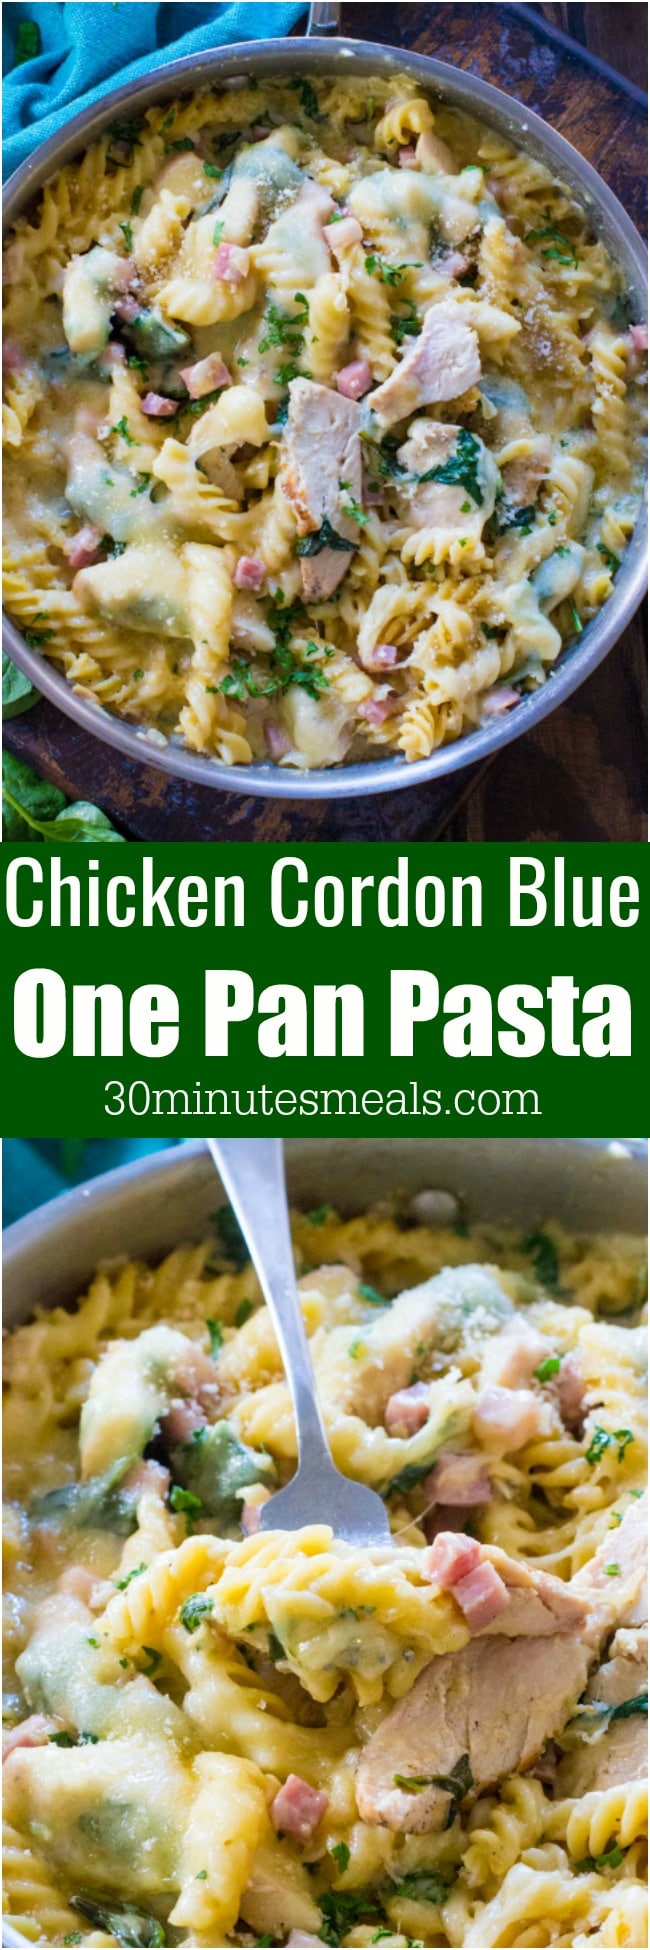 30 Minute Pasta Recipes are the perfect weeknight dinners, easily made in just one pan. This Chicken Cordon Bleu Pasta is tasty, full of flavor and hassle free.